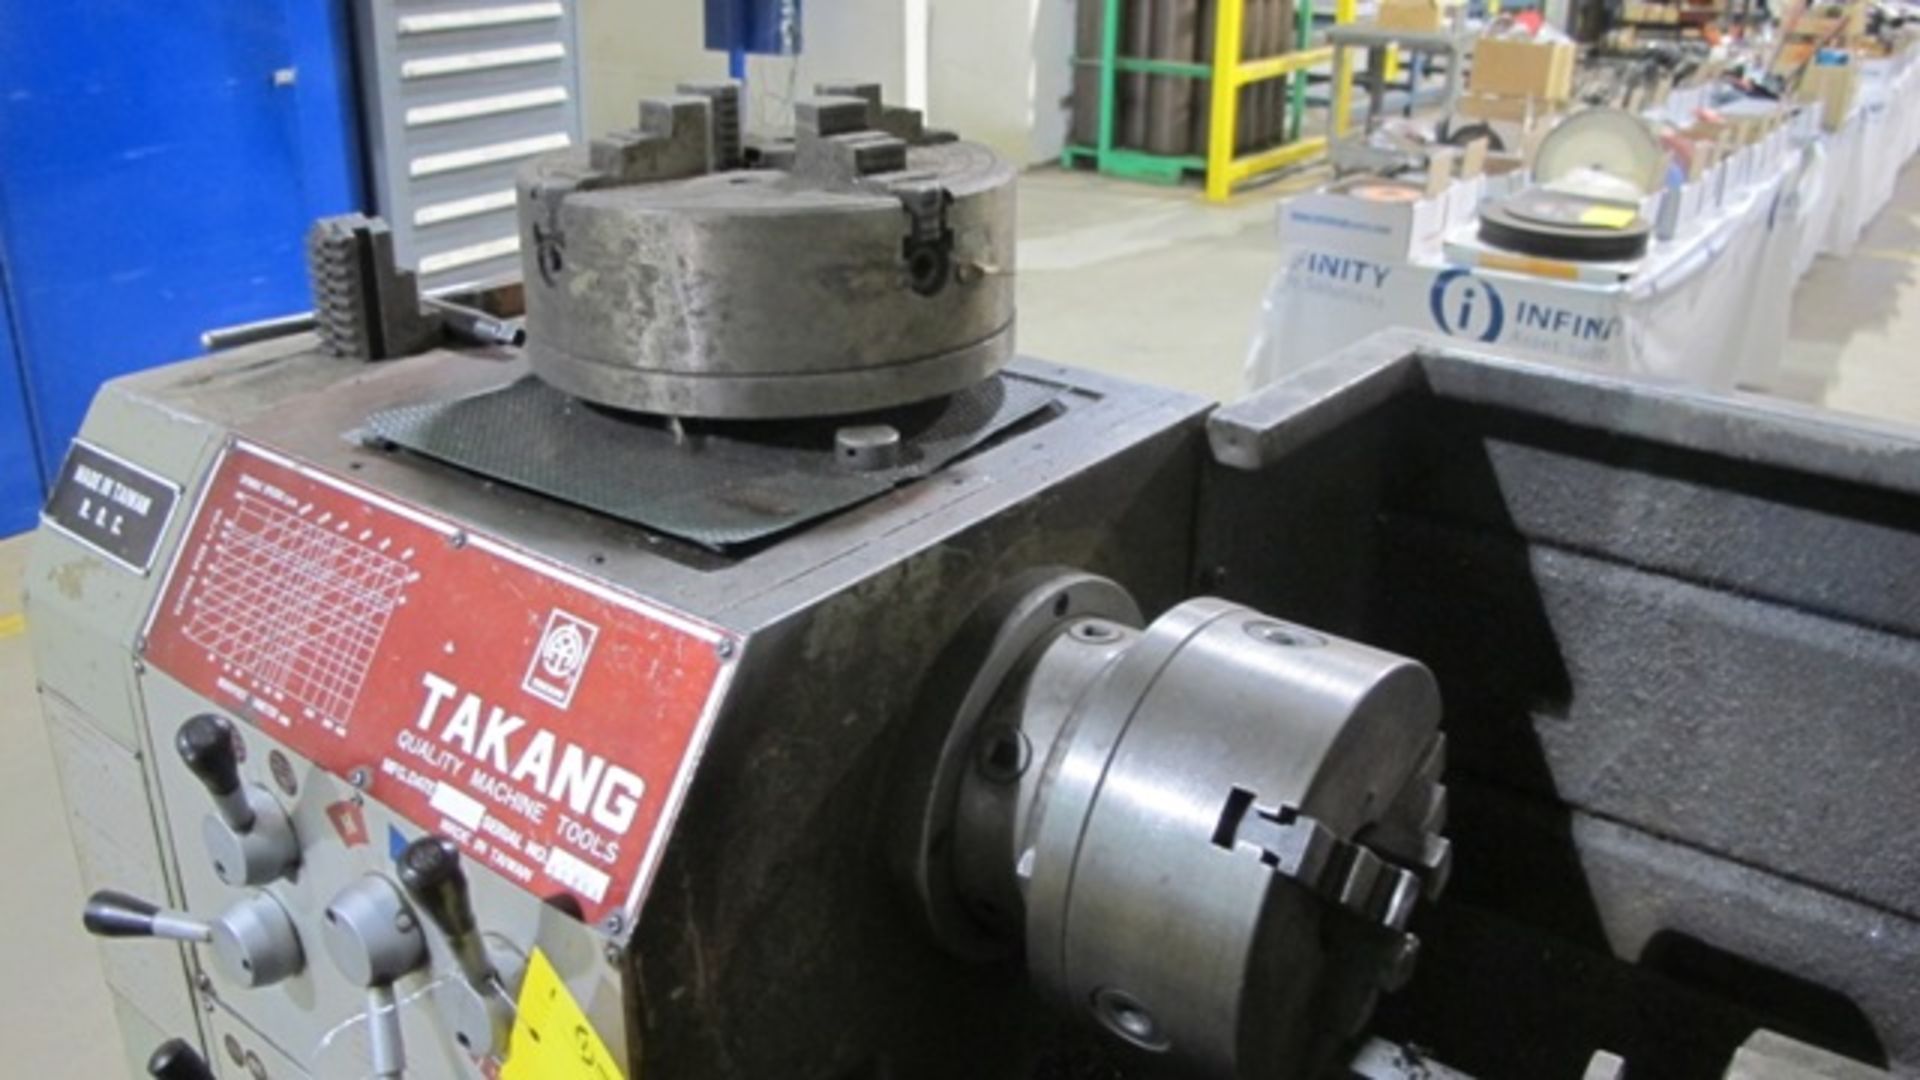 TAKANG TK330L LATHES, 3+4 JAW CHUCKS, TAILSTOCK, TOOL POST, QUICK CHANGE TOOL HOLDER, 14" SWING, - Image 3 of 5